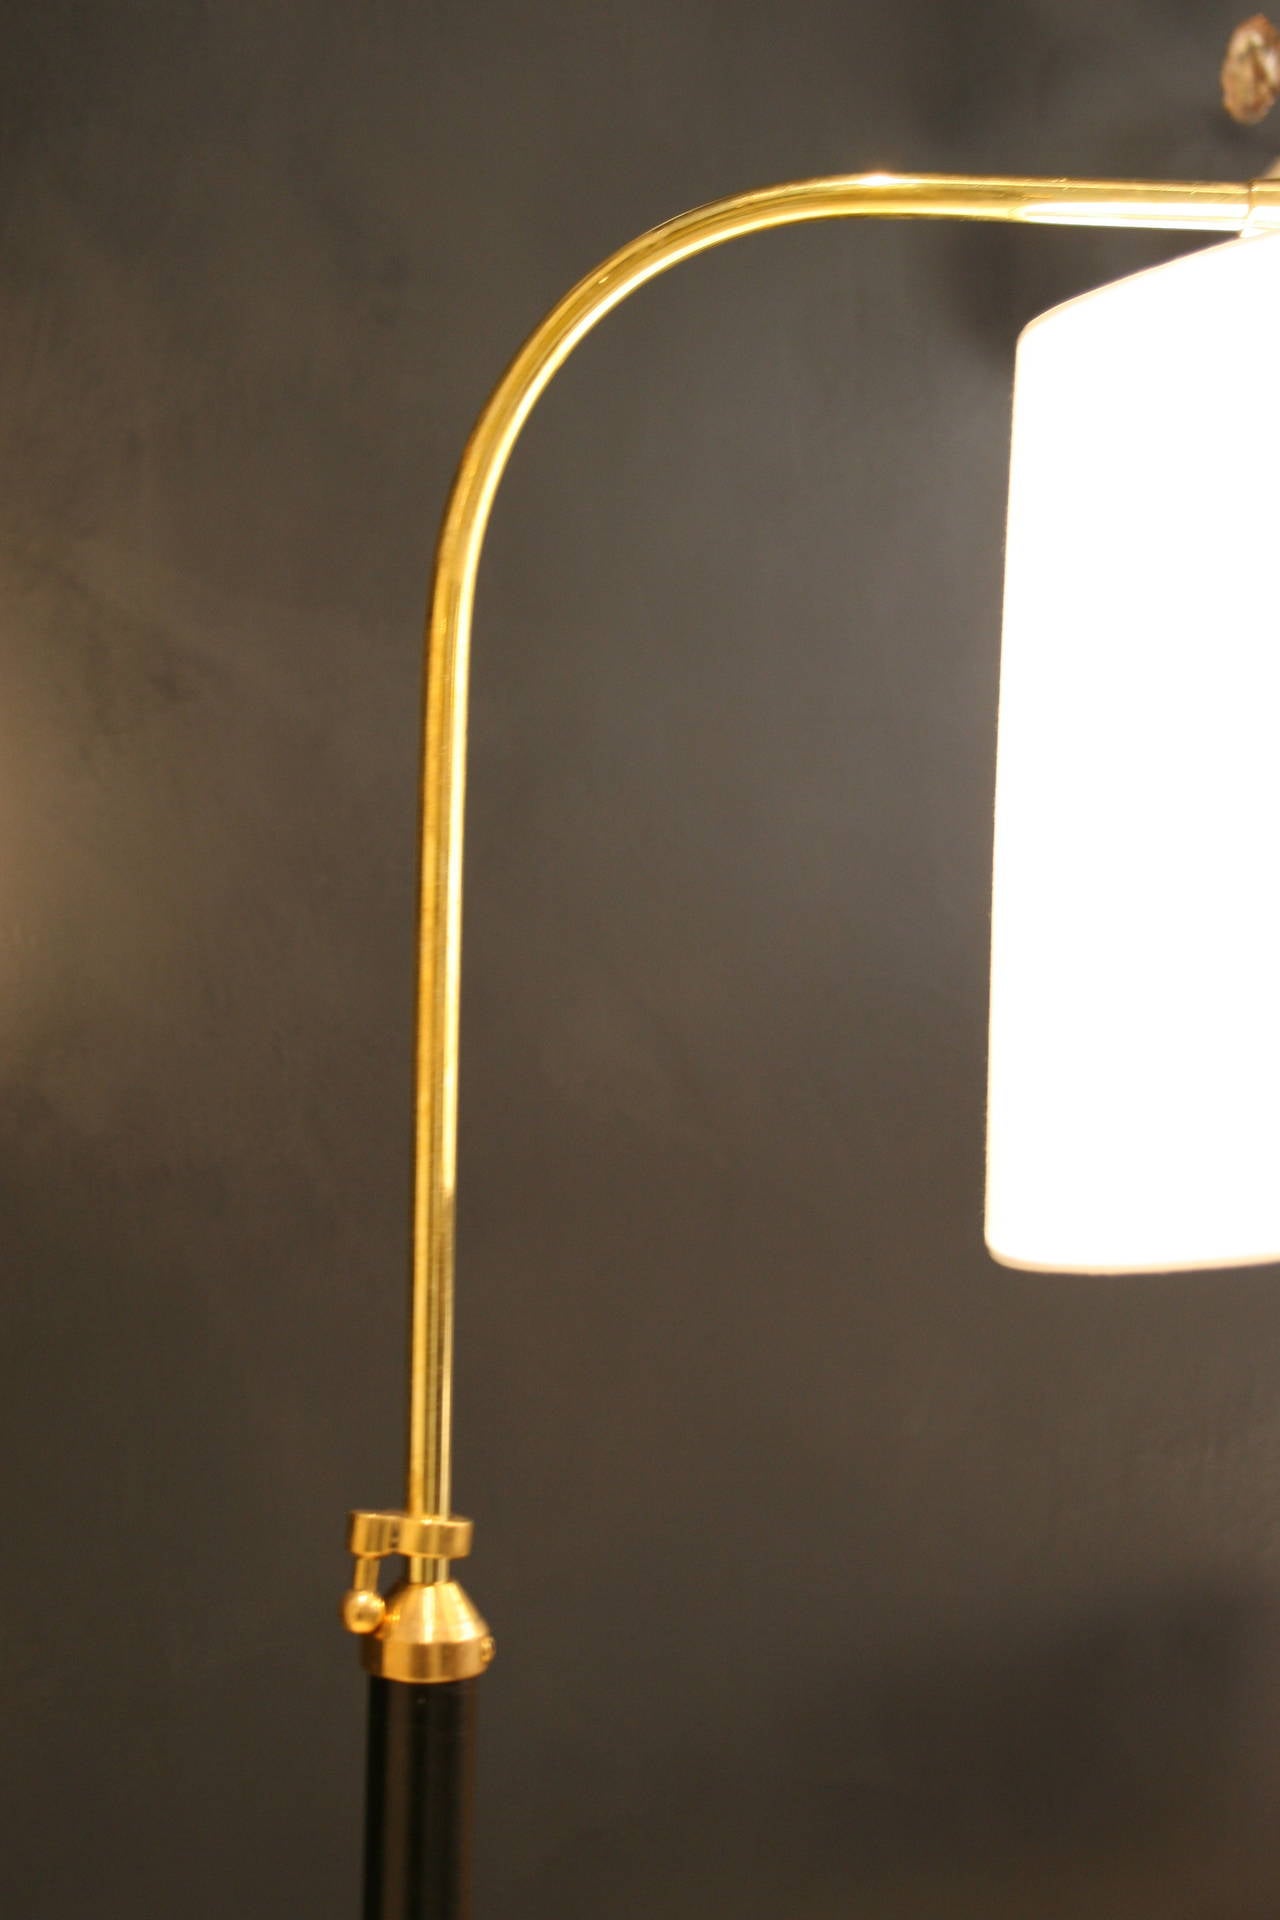 Hand-stitched leather and brass reading lamp by Jacques Adnet.
Silk Shade is fully articulating. Arched Brass arm swivels and 
extends to a height from 52